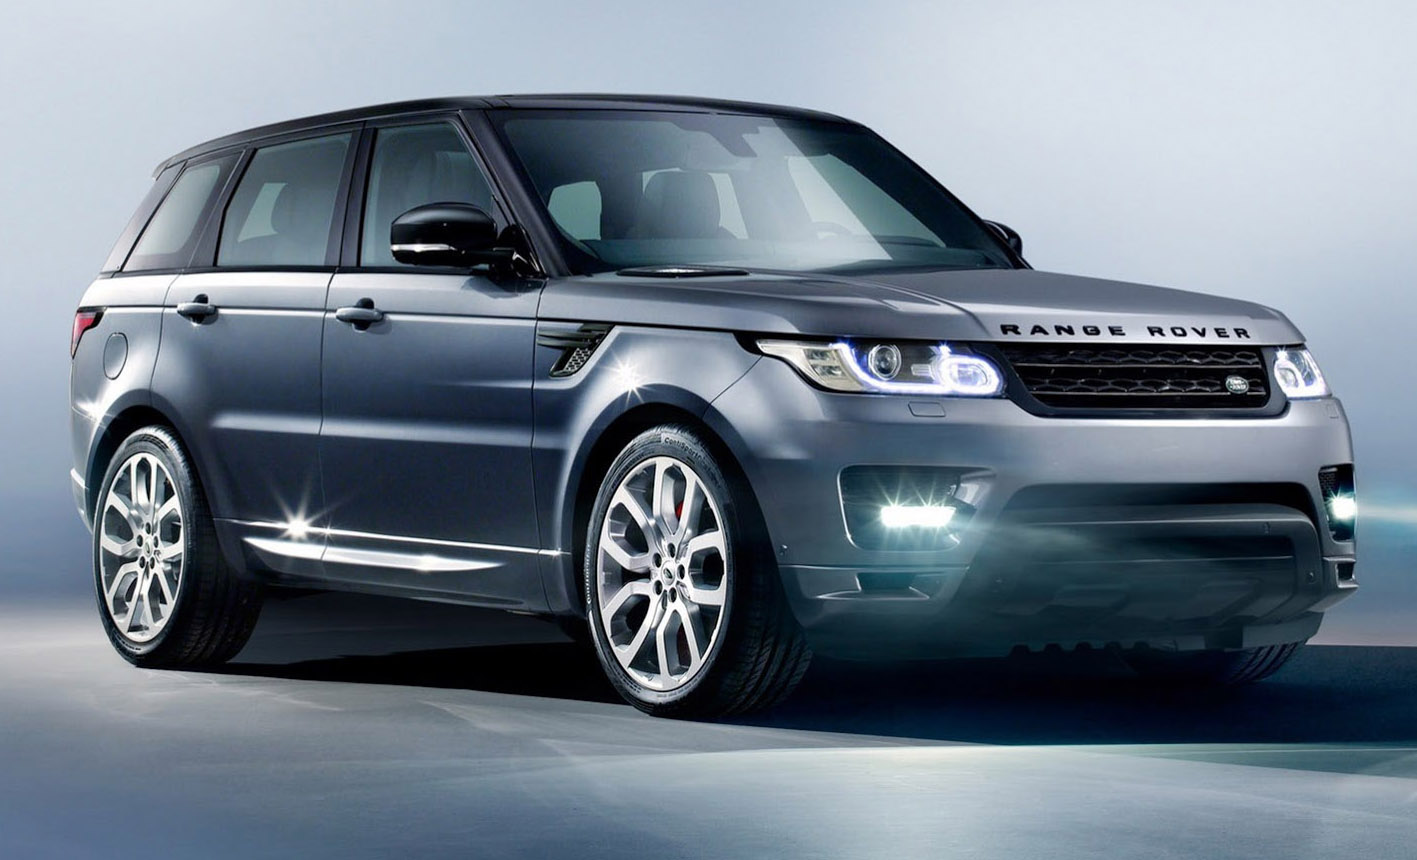 2014 Range Rover Sport Expected to Launch in India on October 17